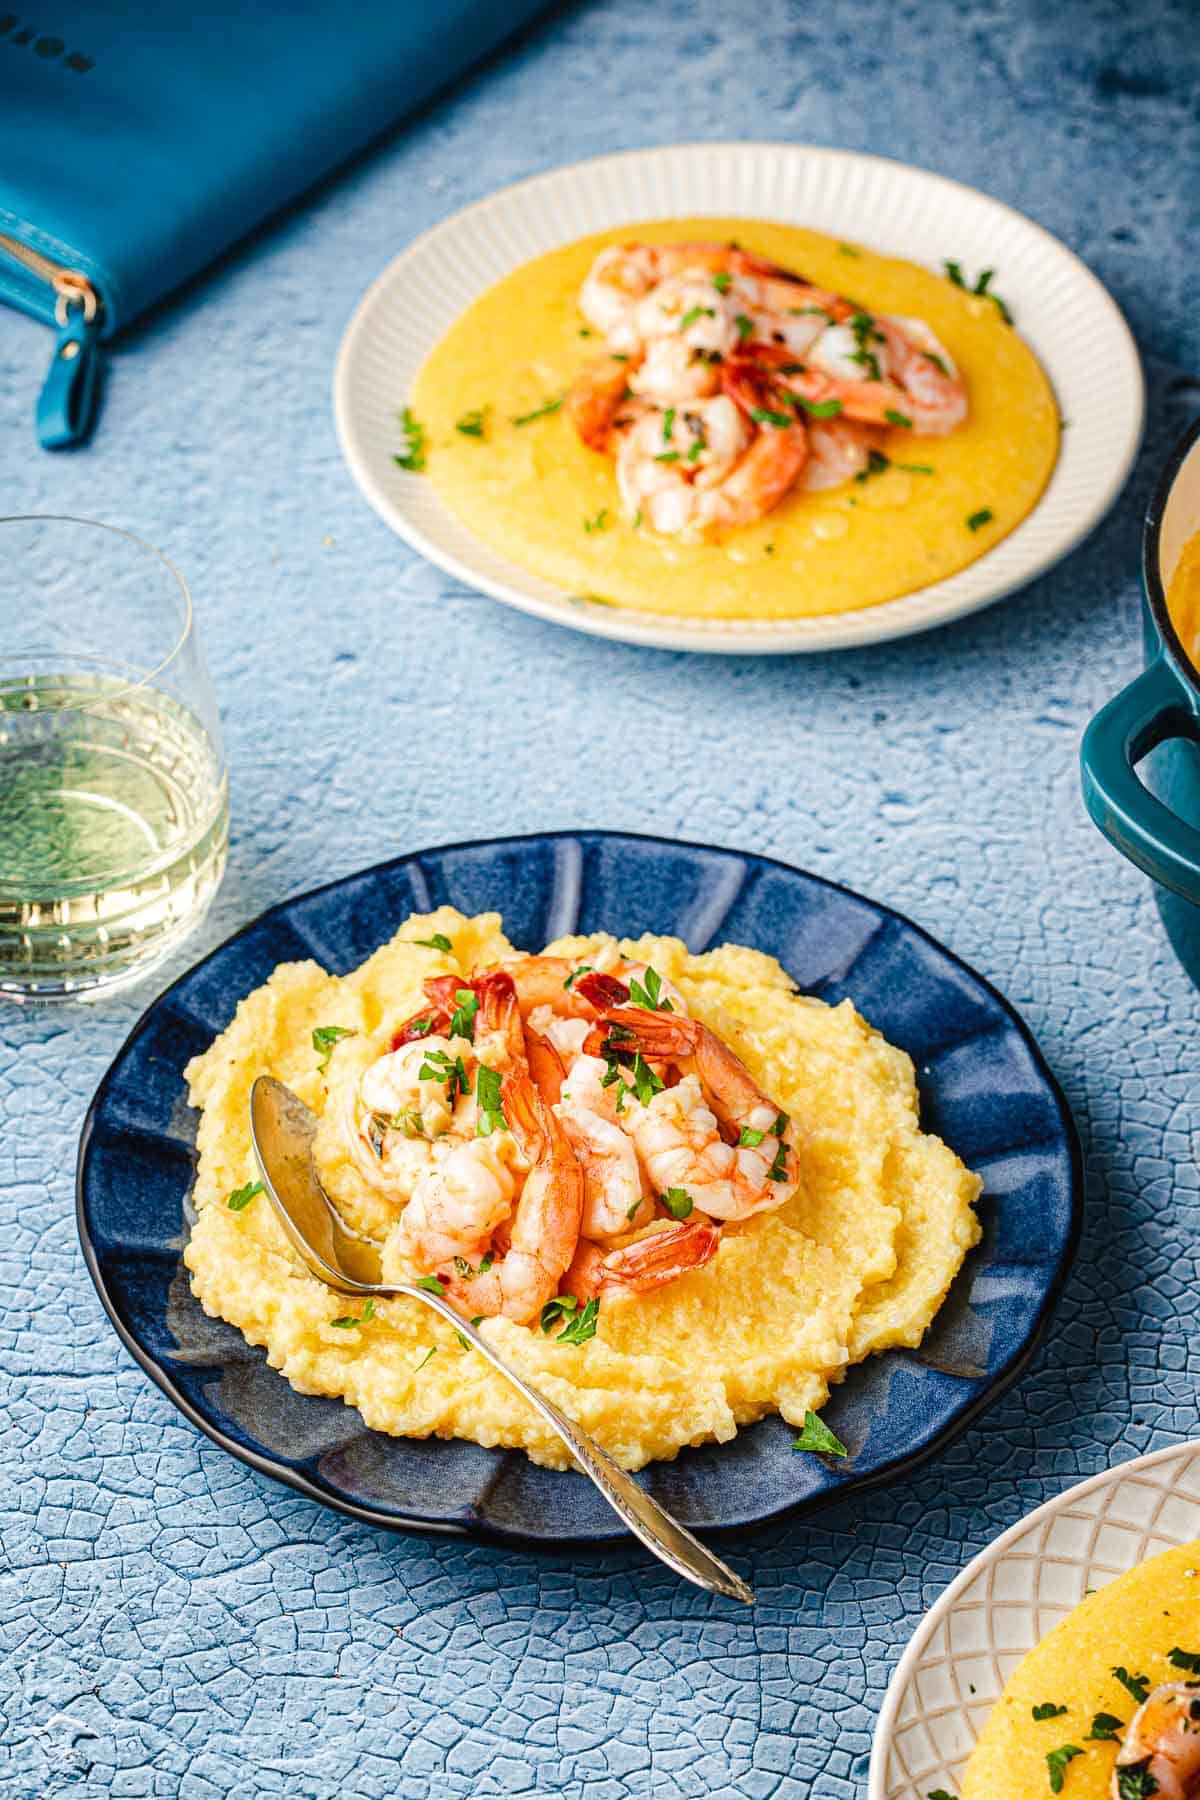 two plates of polenta and shrimp garnished with parsley next to a glass of wine.